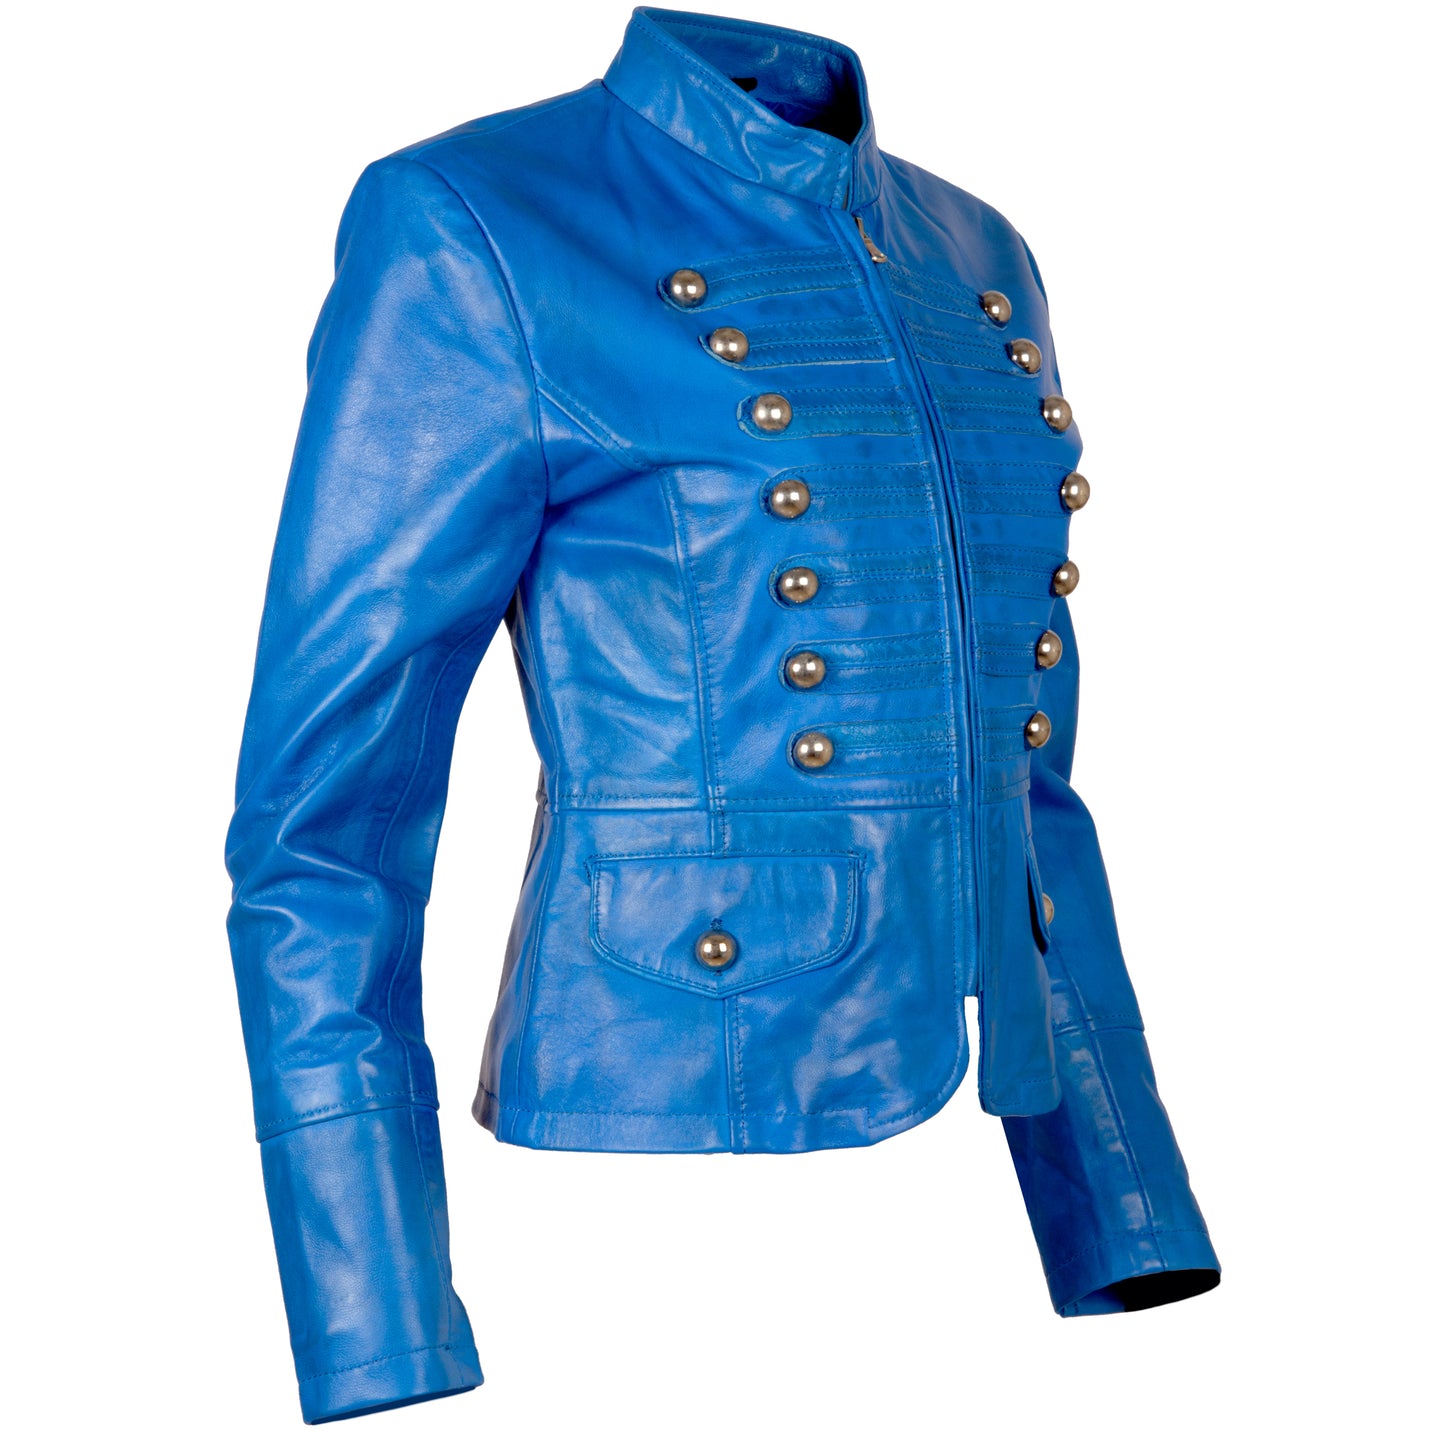 Aviatrix Women’s Real Leather Military Parade Jacket with Decorative Buttons (T5J4) - Electric Blue